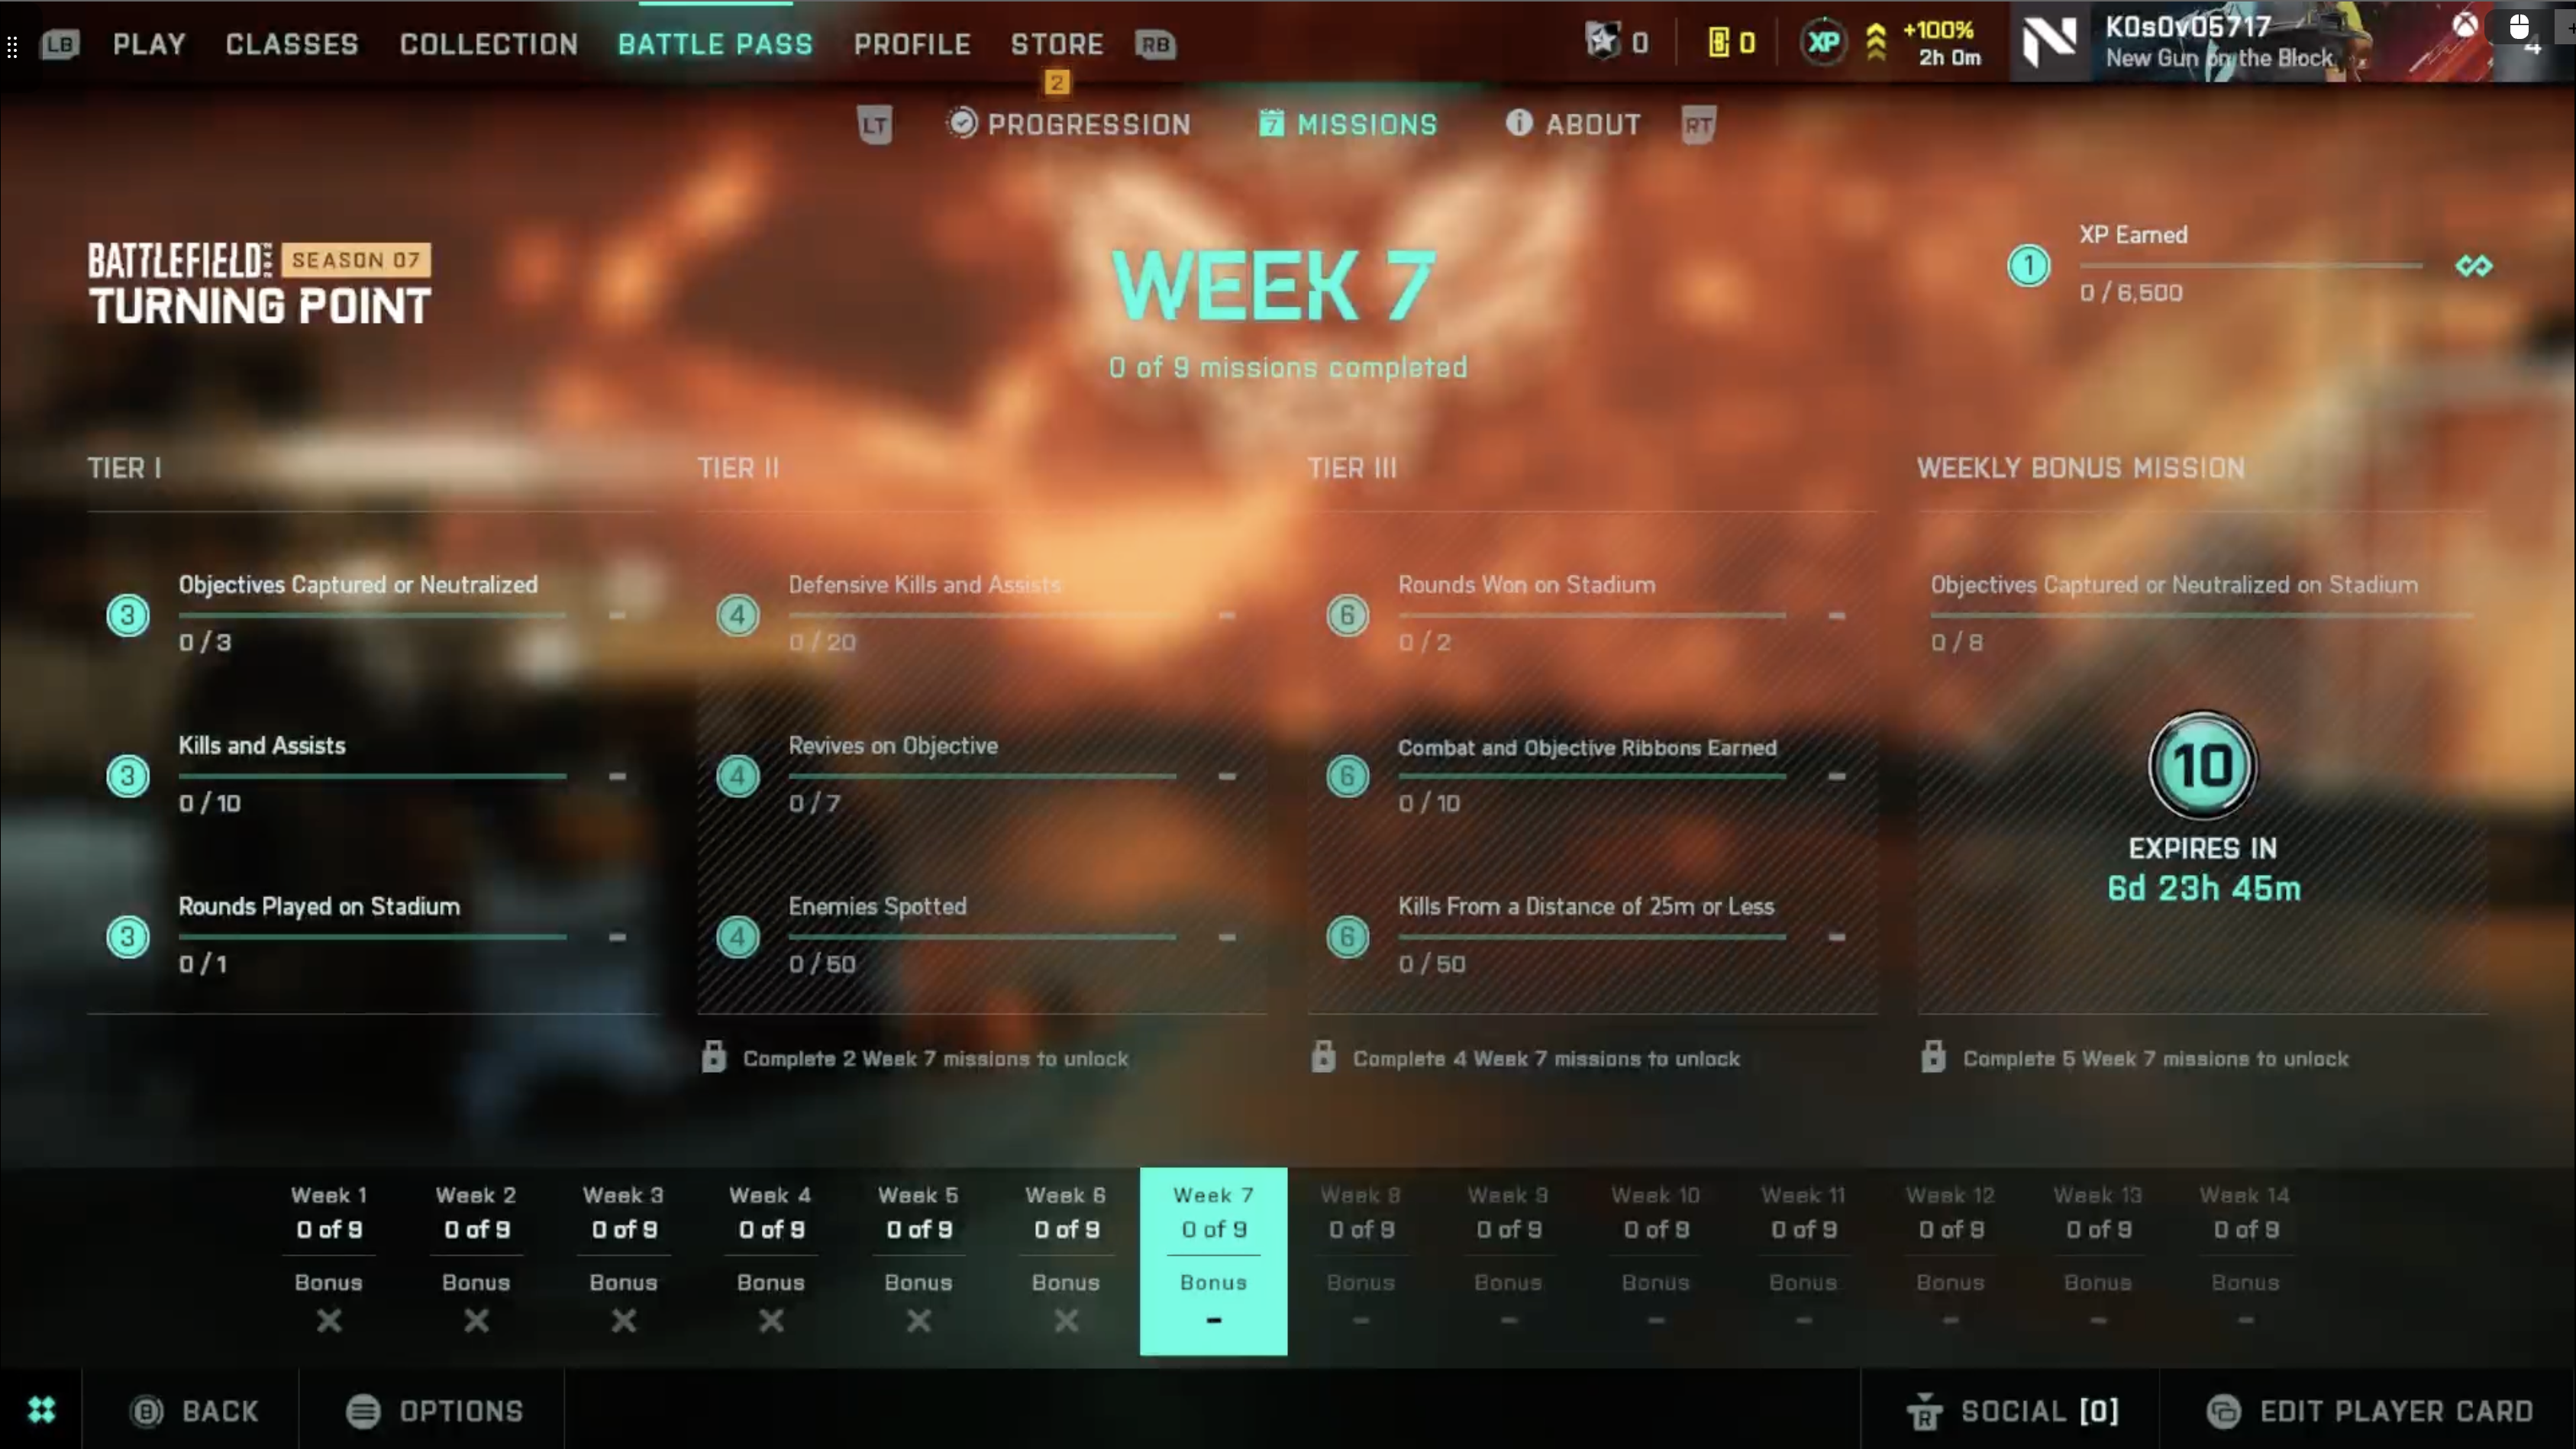 New Battlefield 2042 Weekly Missions, Store Bundles for Season 7 Week 7 Listed (April 30)